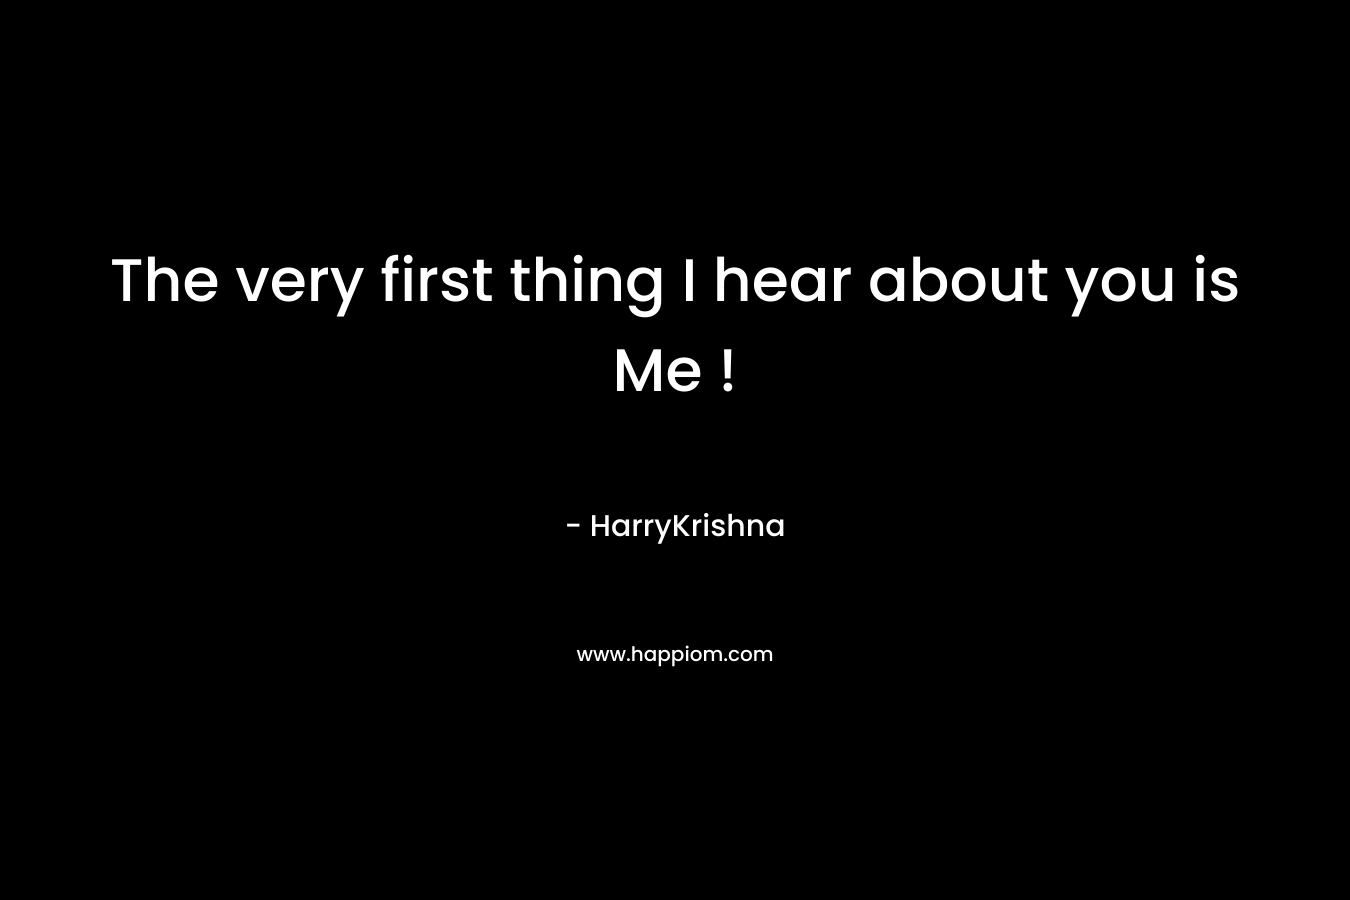 The very first thing I hear about you is Me !